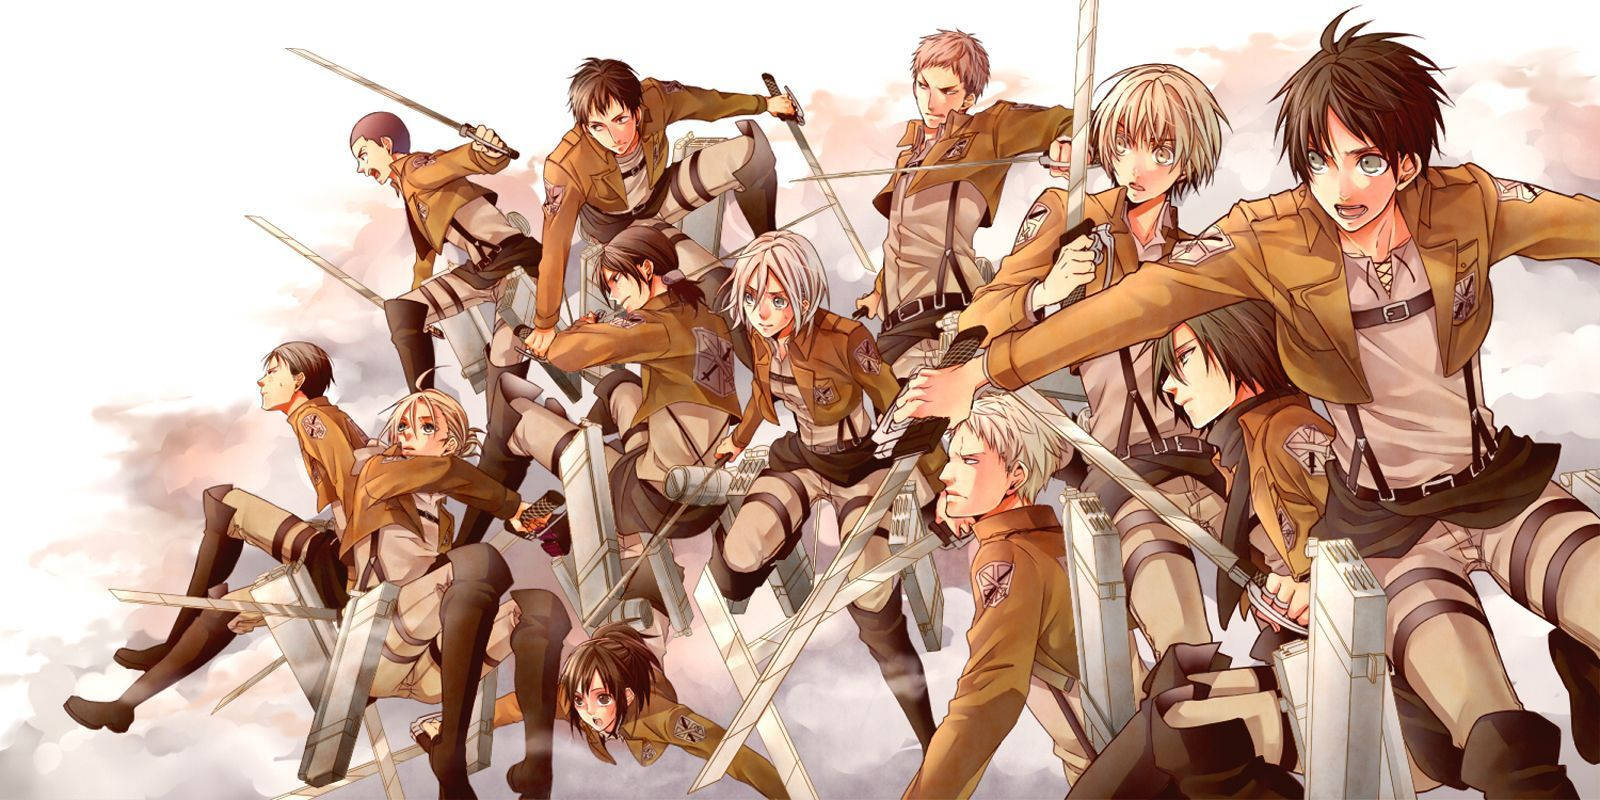 Members Of The Survey Corps Defended The Walls Of Their Kingdom From The Titans.